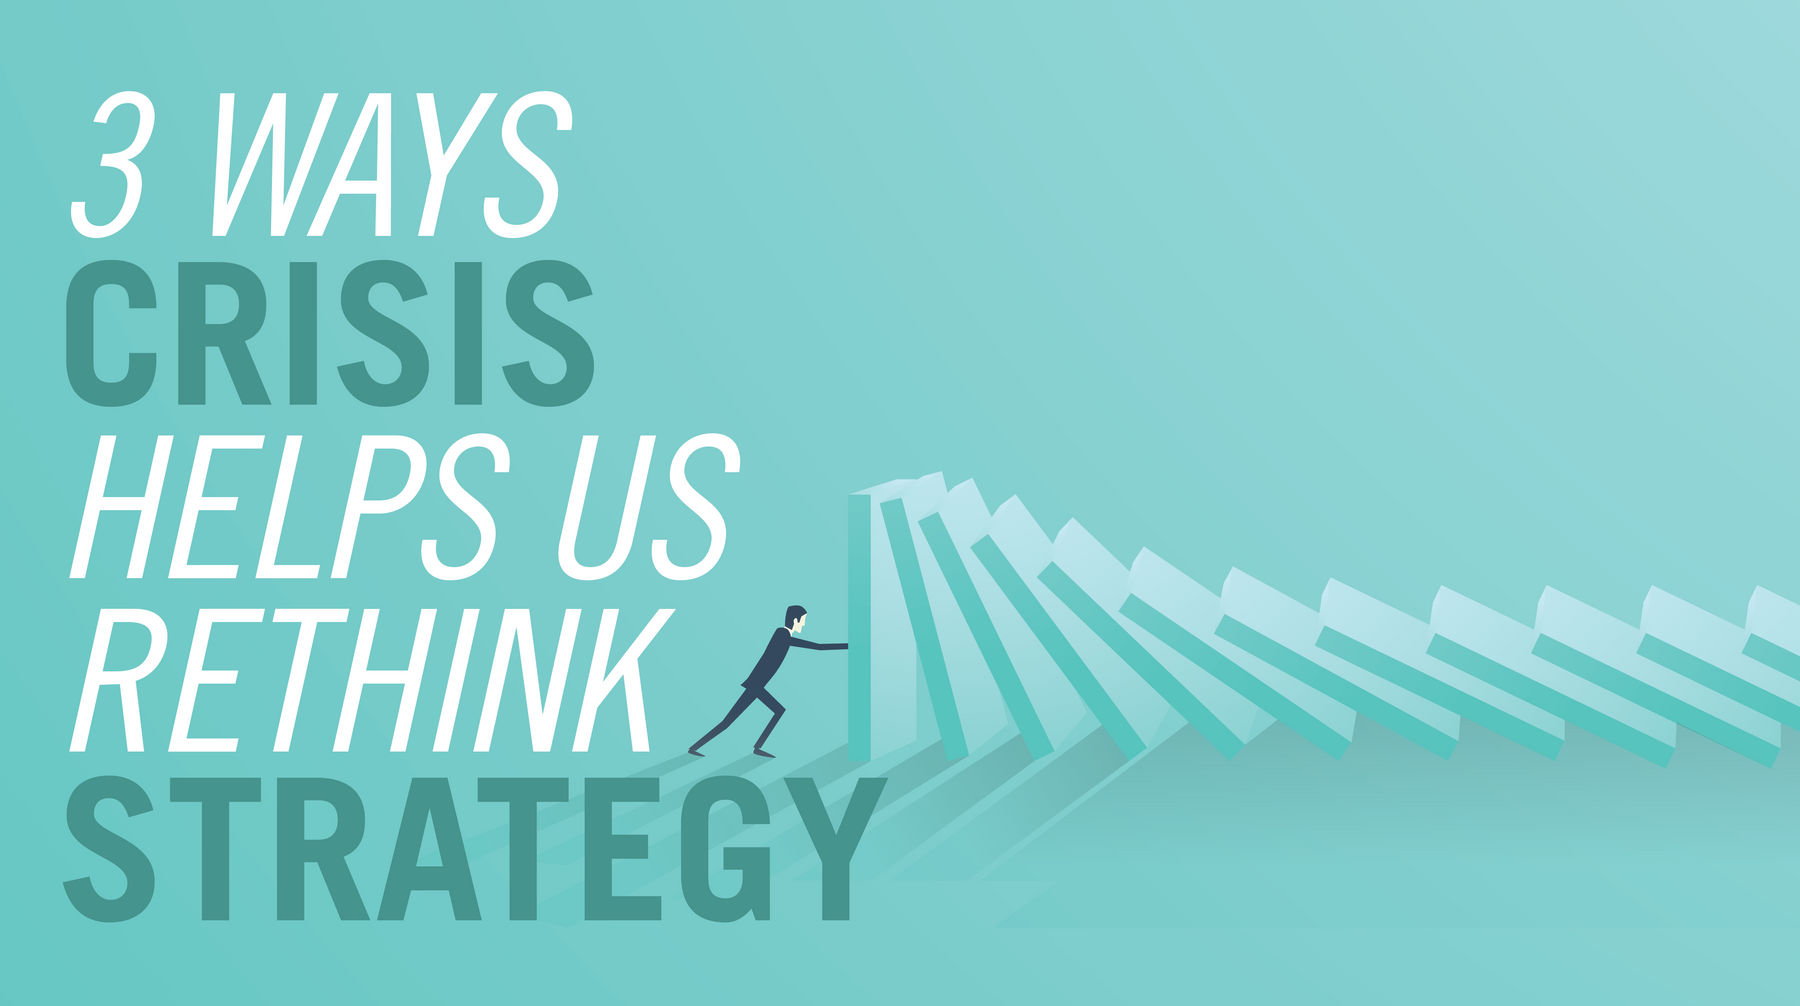 3 Ways That A Crisis Helps Us Rethink Our Strategy